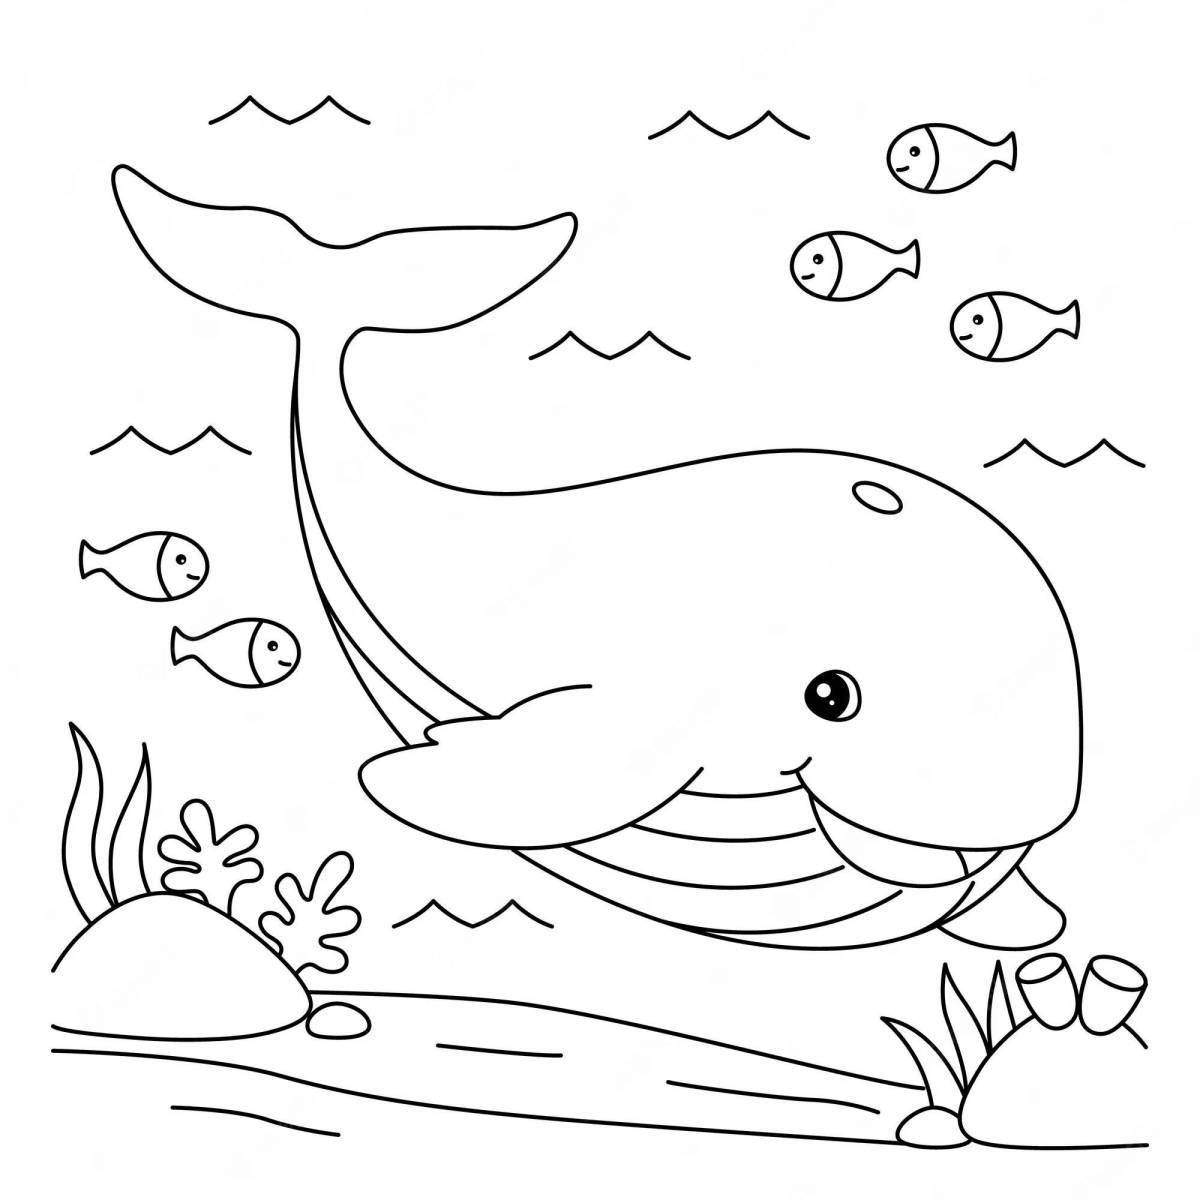 A fun blue whale coloring book for kids